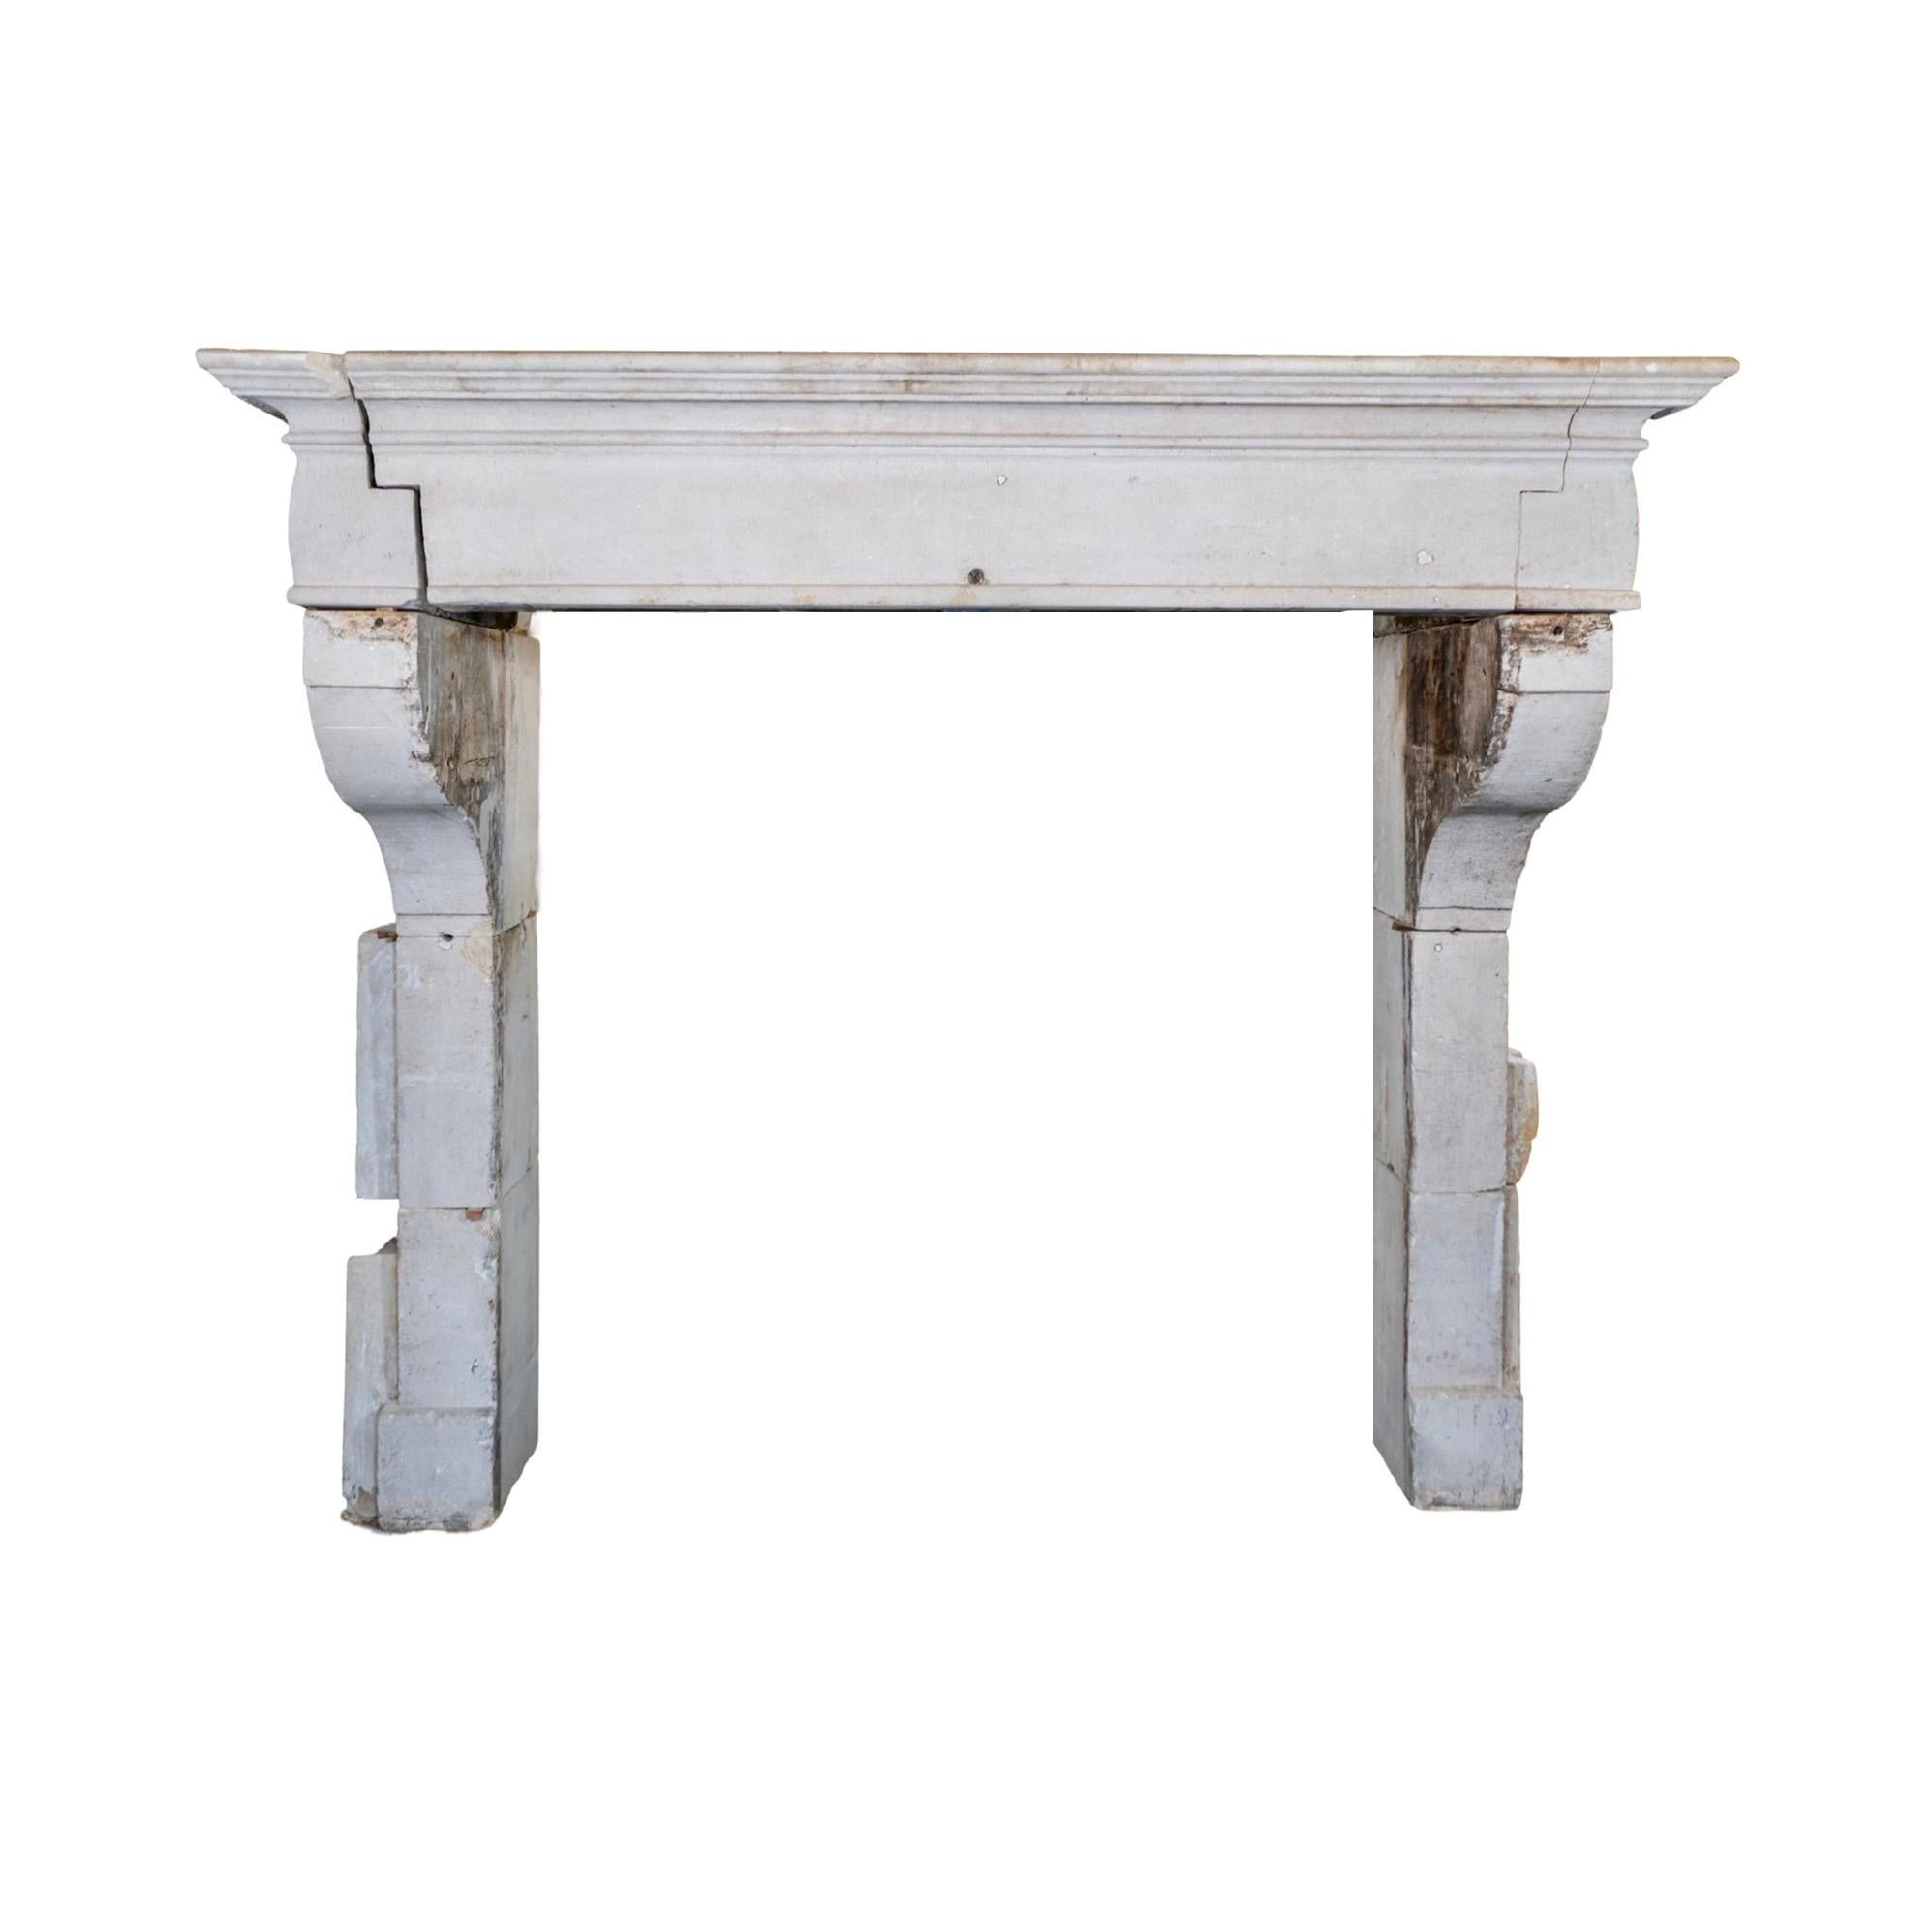 This antique and reclaimed mantel is crafted from French limestone, originating from Bordeaux in 1780. Its authentic material and vintage origin add a touch of elegance to any fireplace.